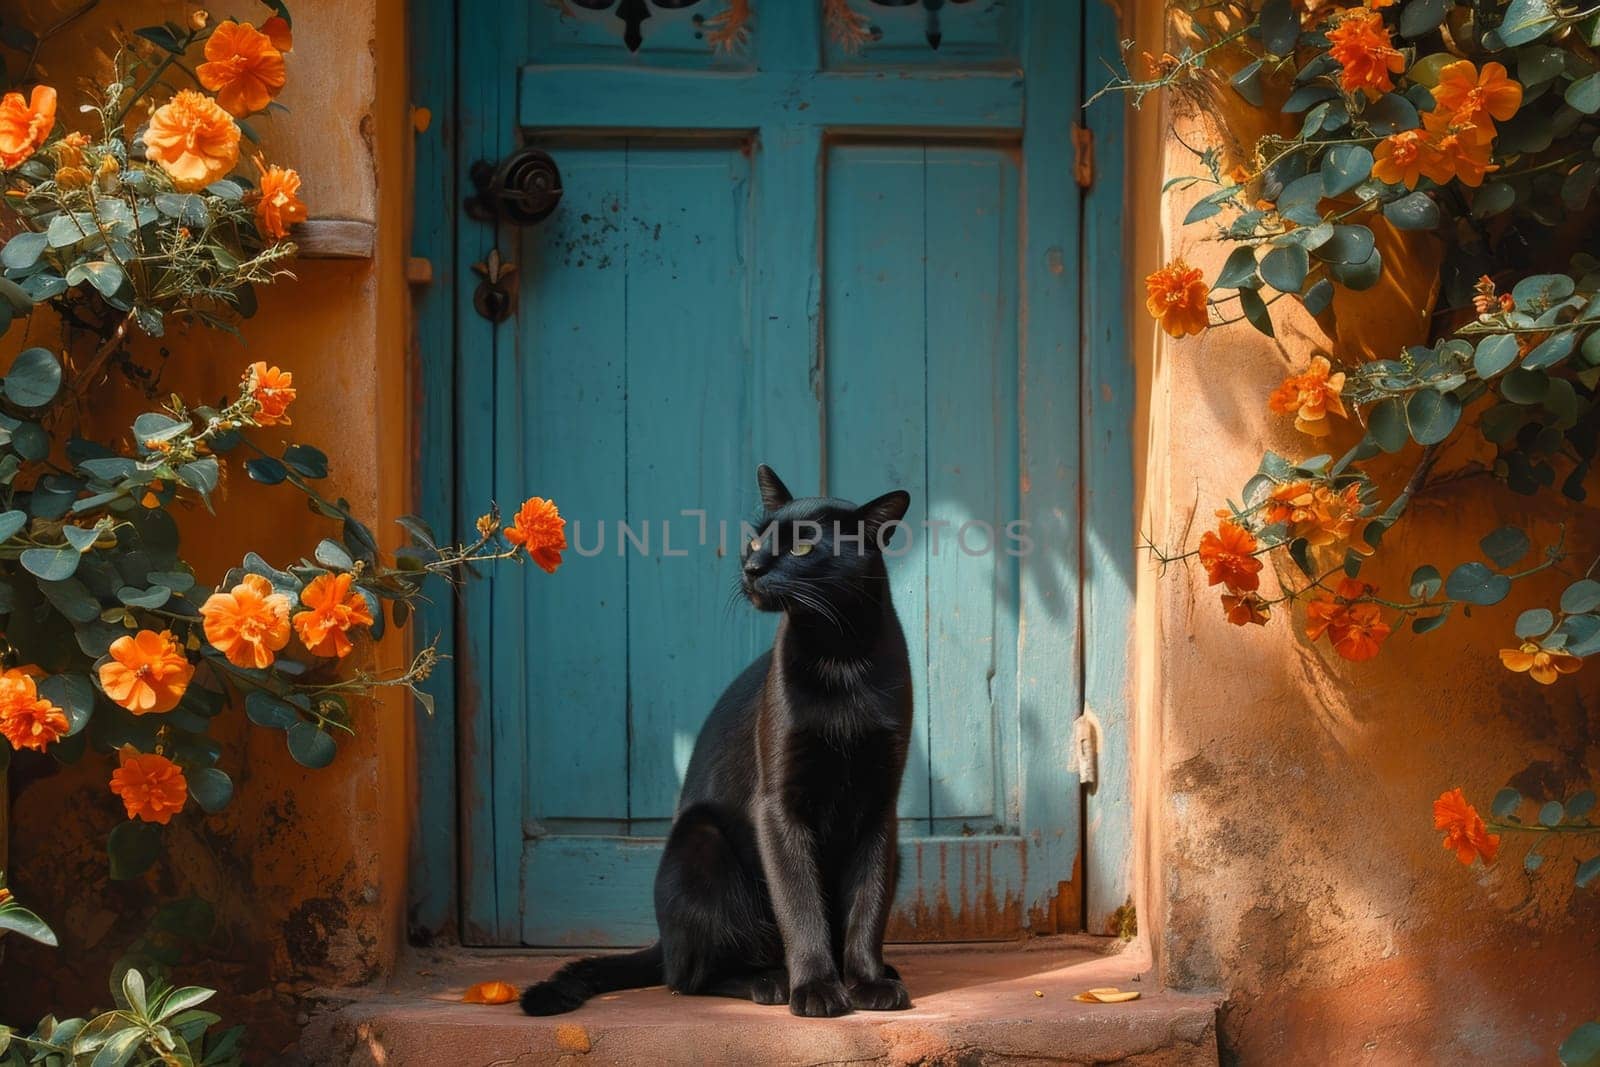 There was a cute black cat sitting near the door, guarding the entrance by Lobachad